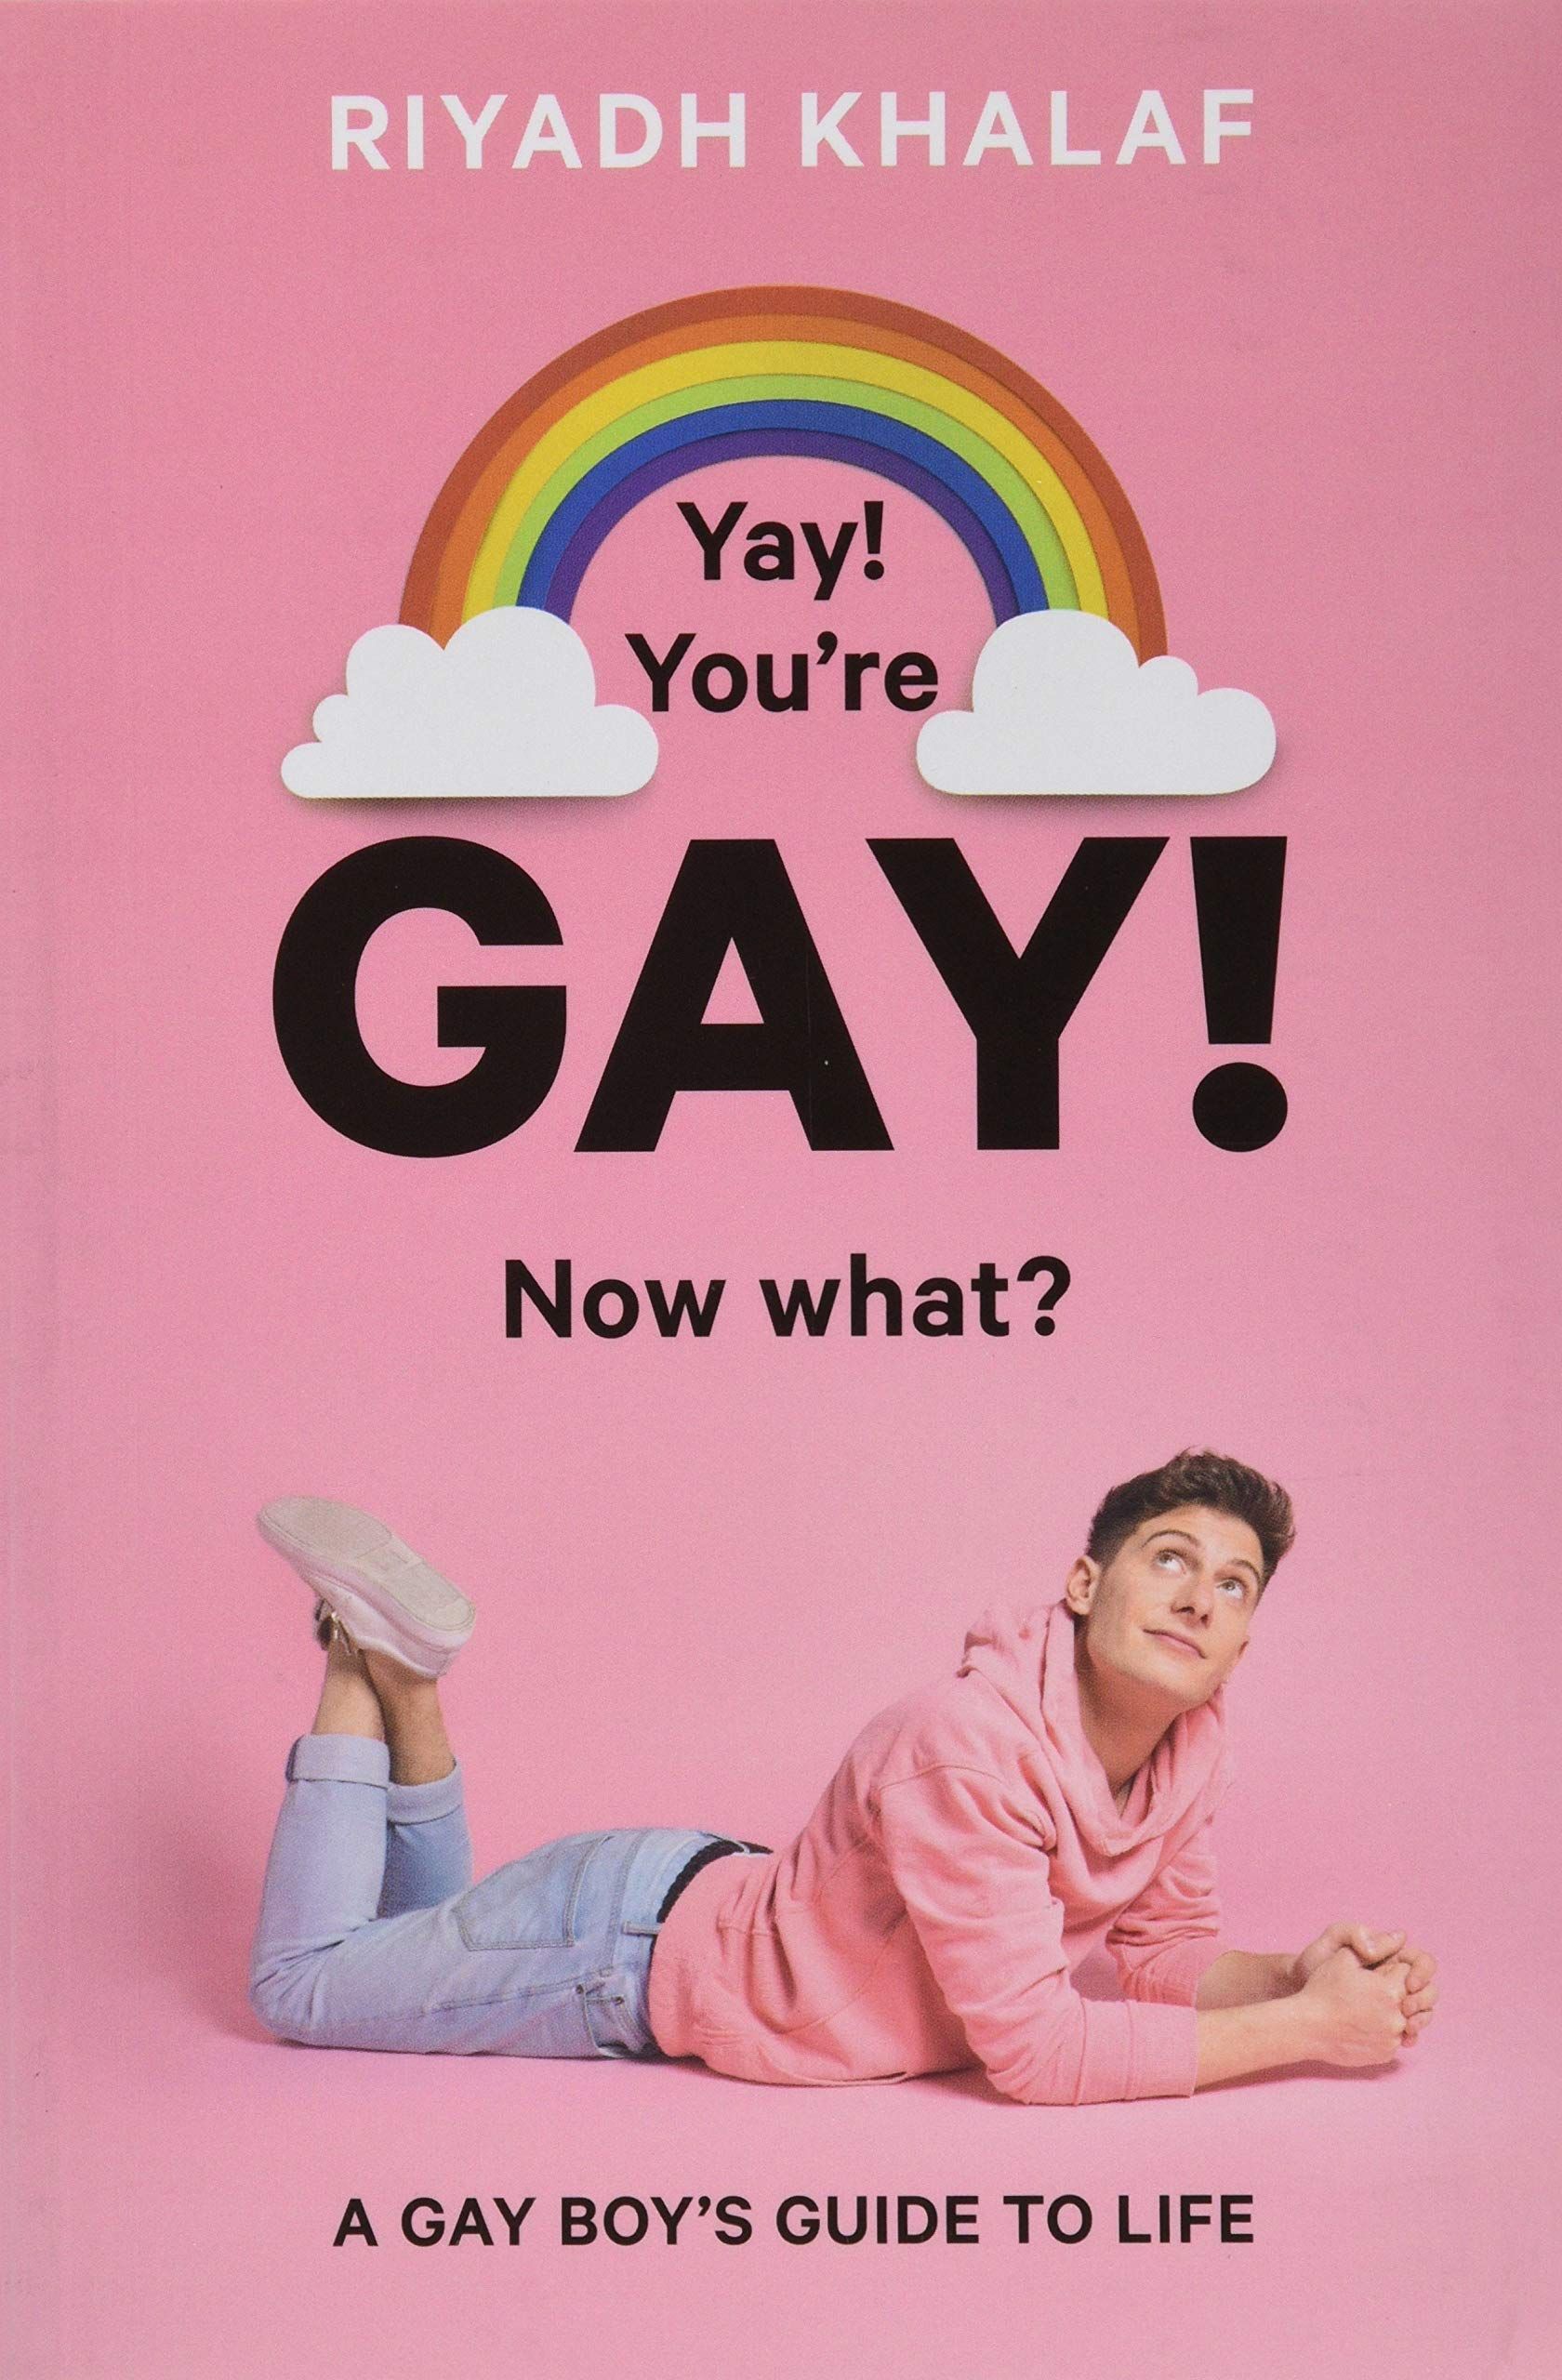 Yay! You're Gay! Now What? cover